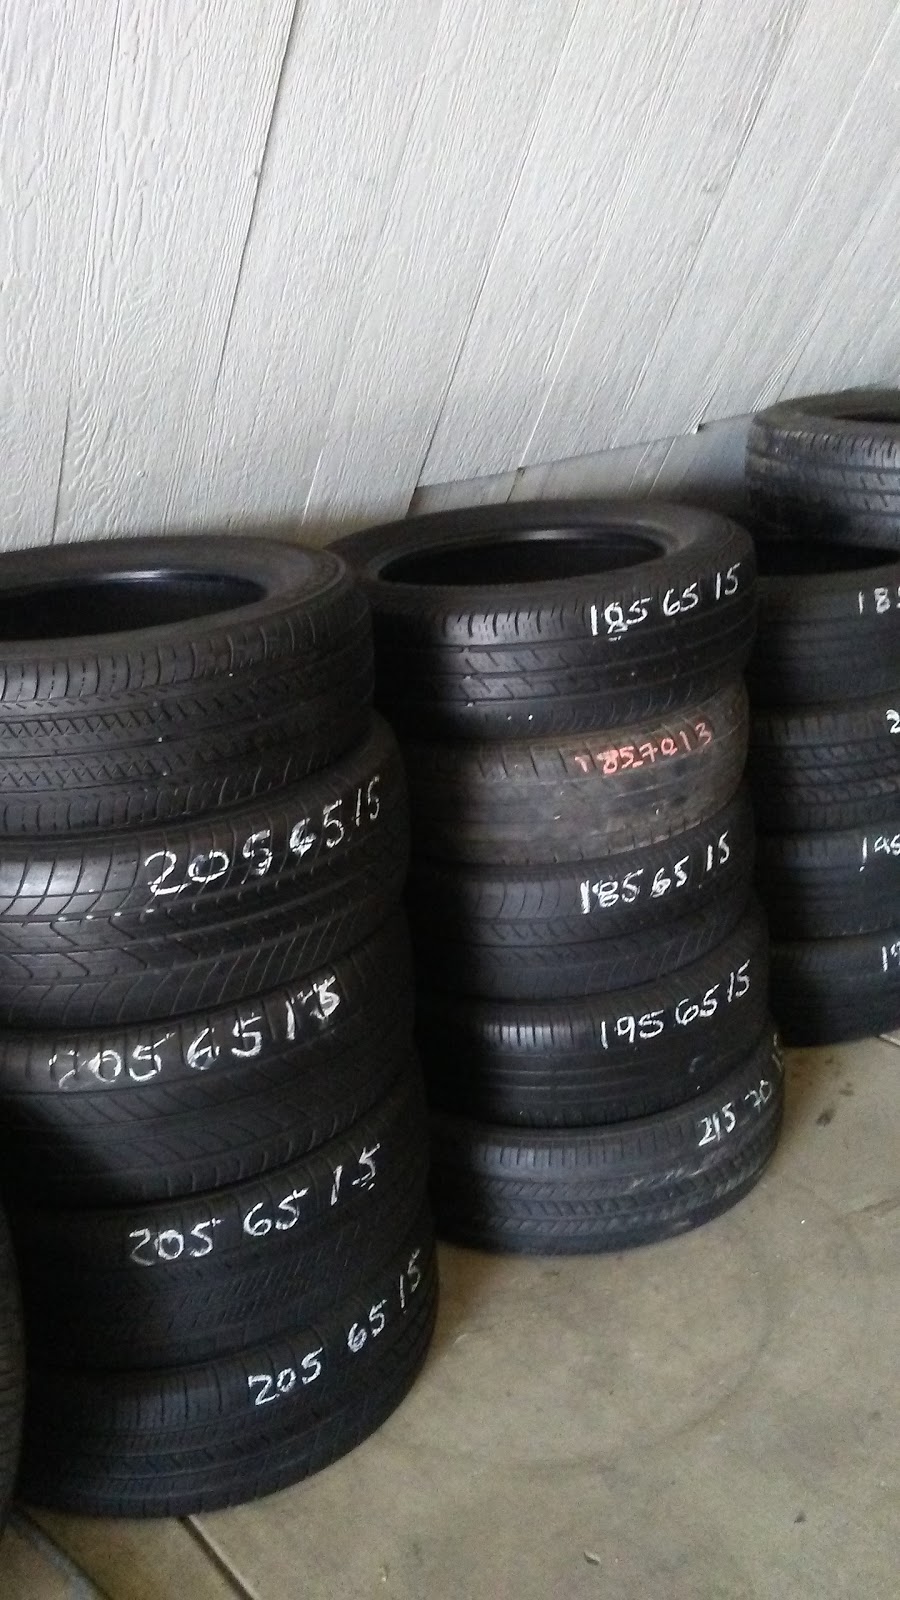 Arriagas Tire Company | 500 N Chester Ave, Bakersfield, CA 93301, USA | Phone: (661) 371-5691